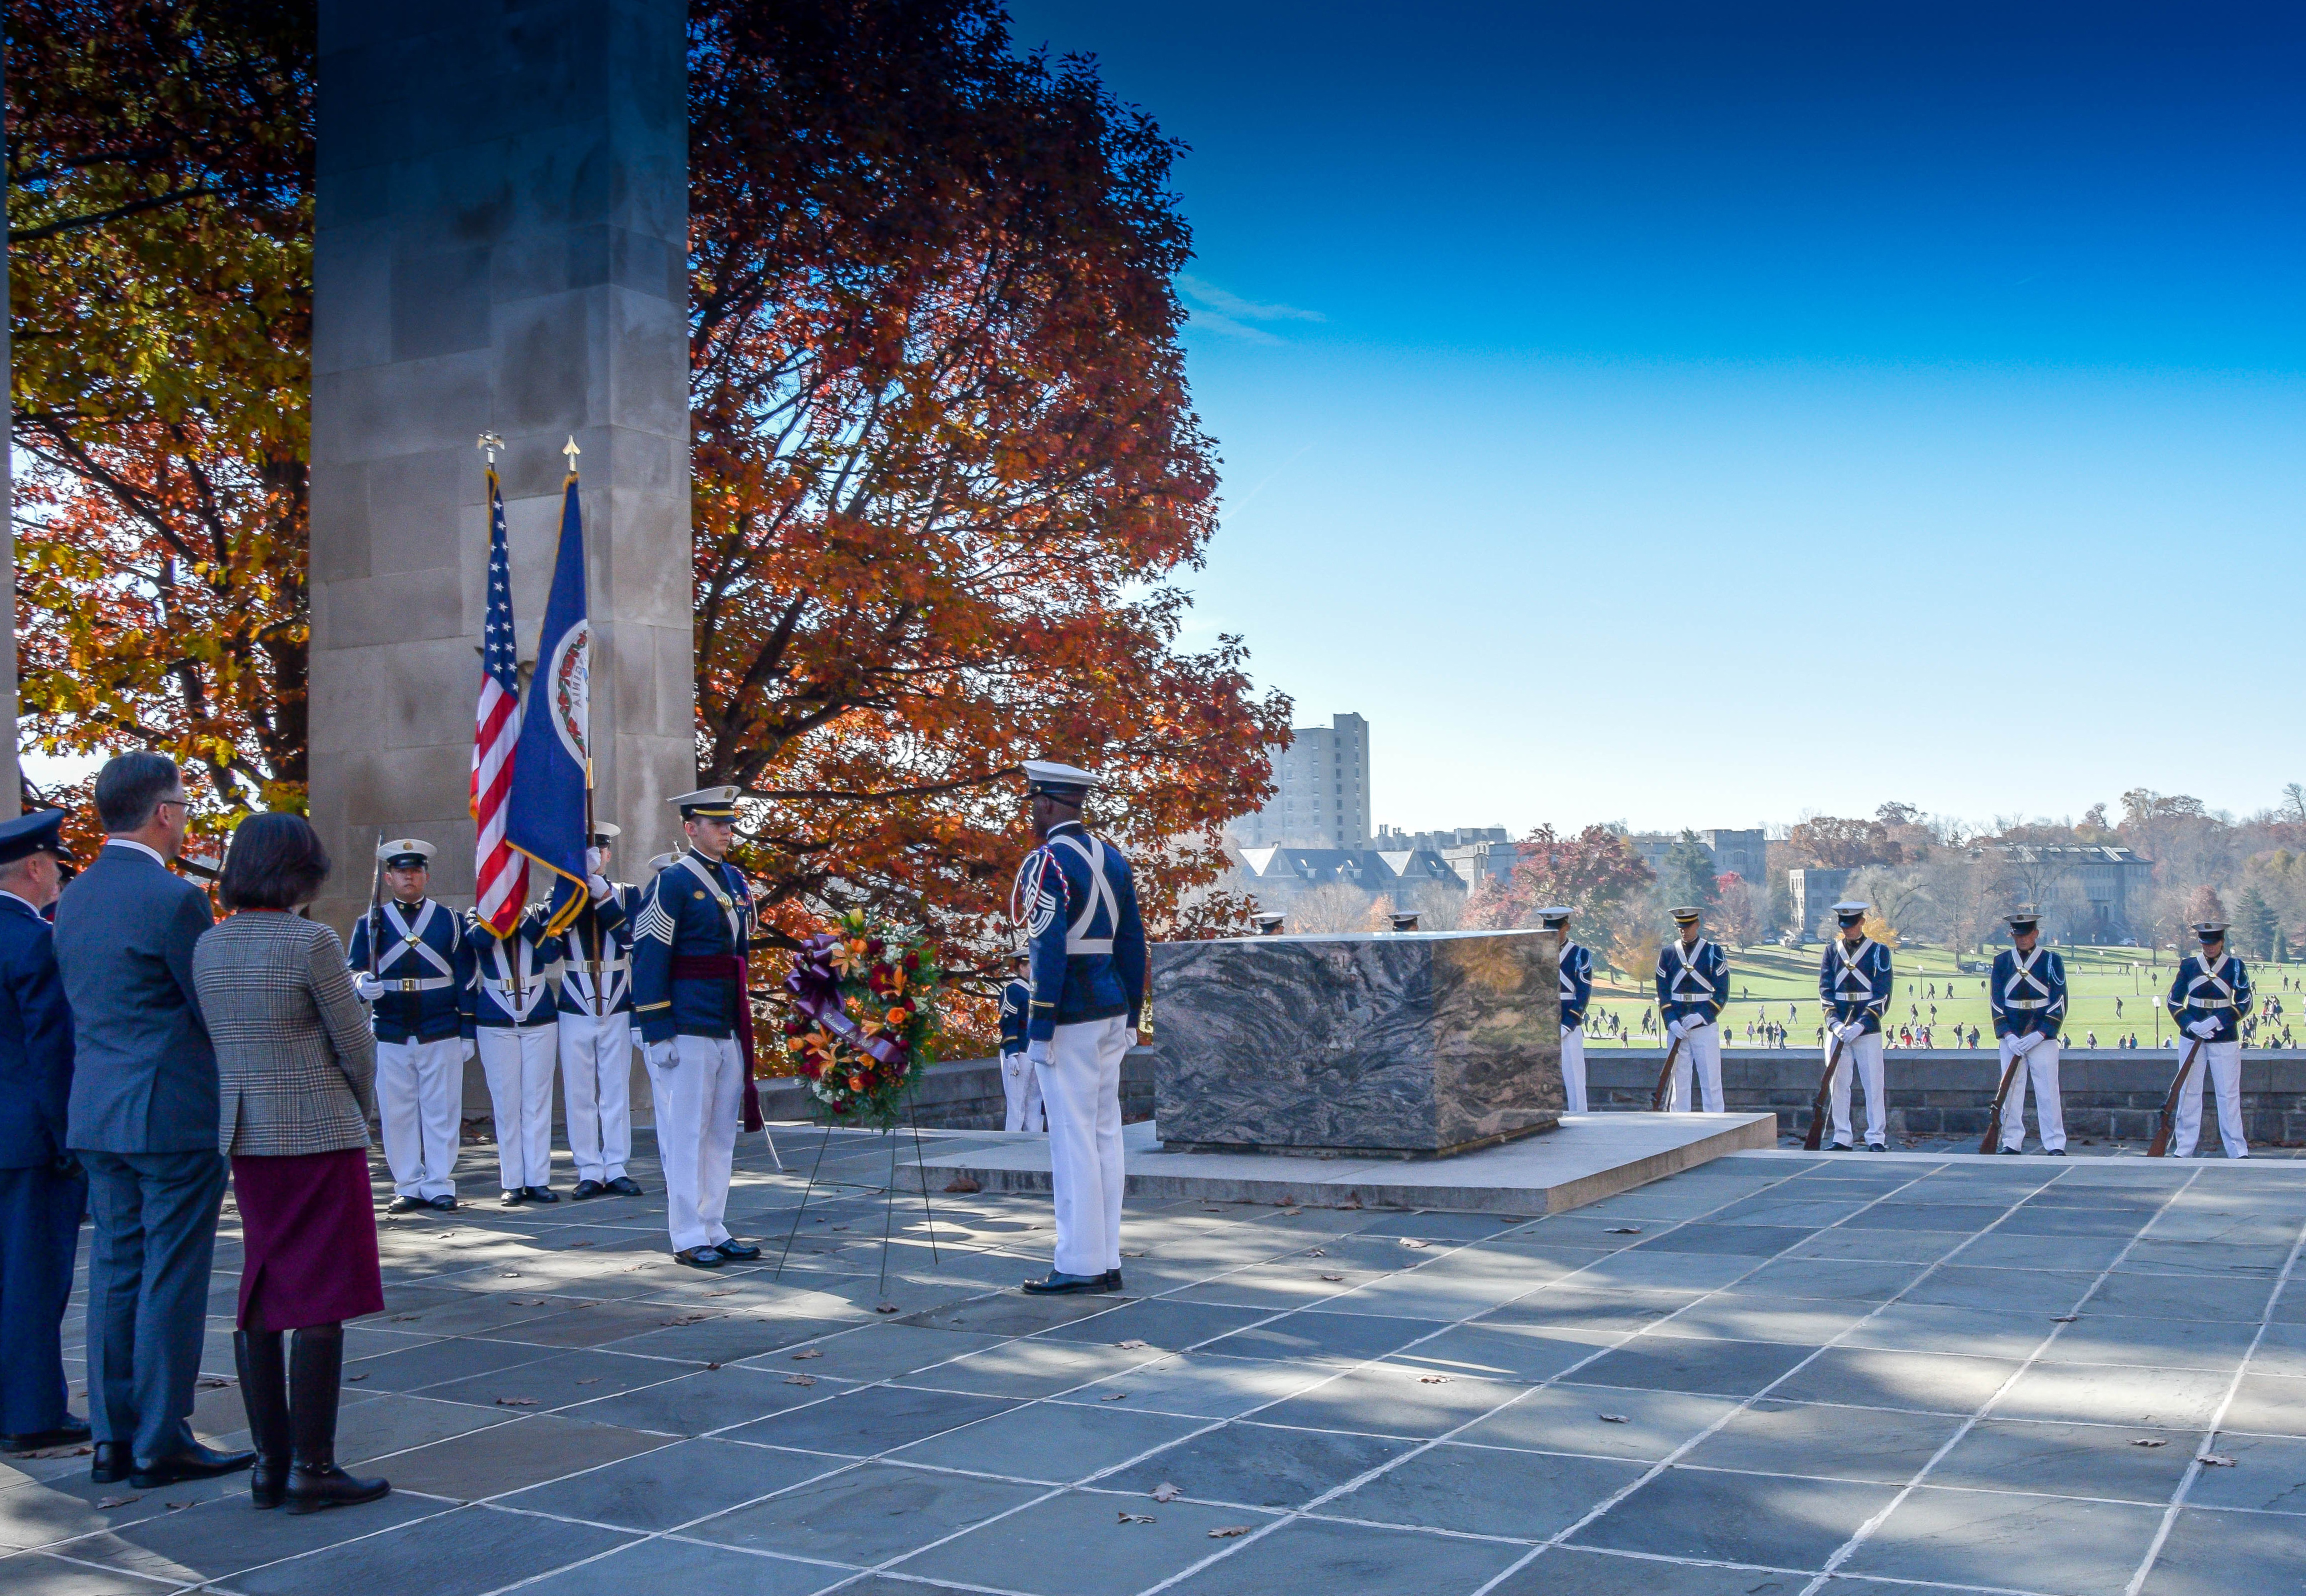 Presentation of the memorial wreath at the Cenotaph during the Veteran's Day ceremony in 2014.